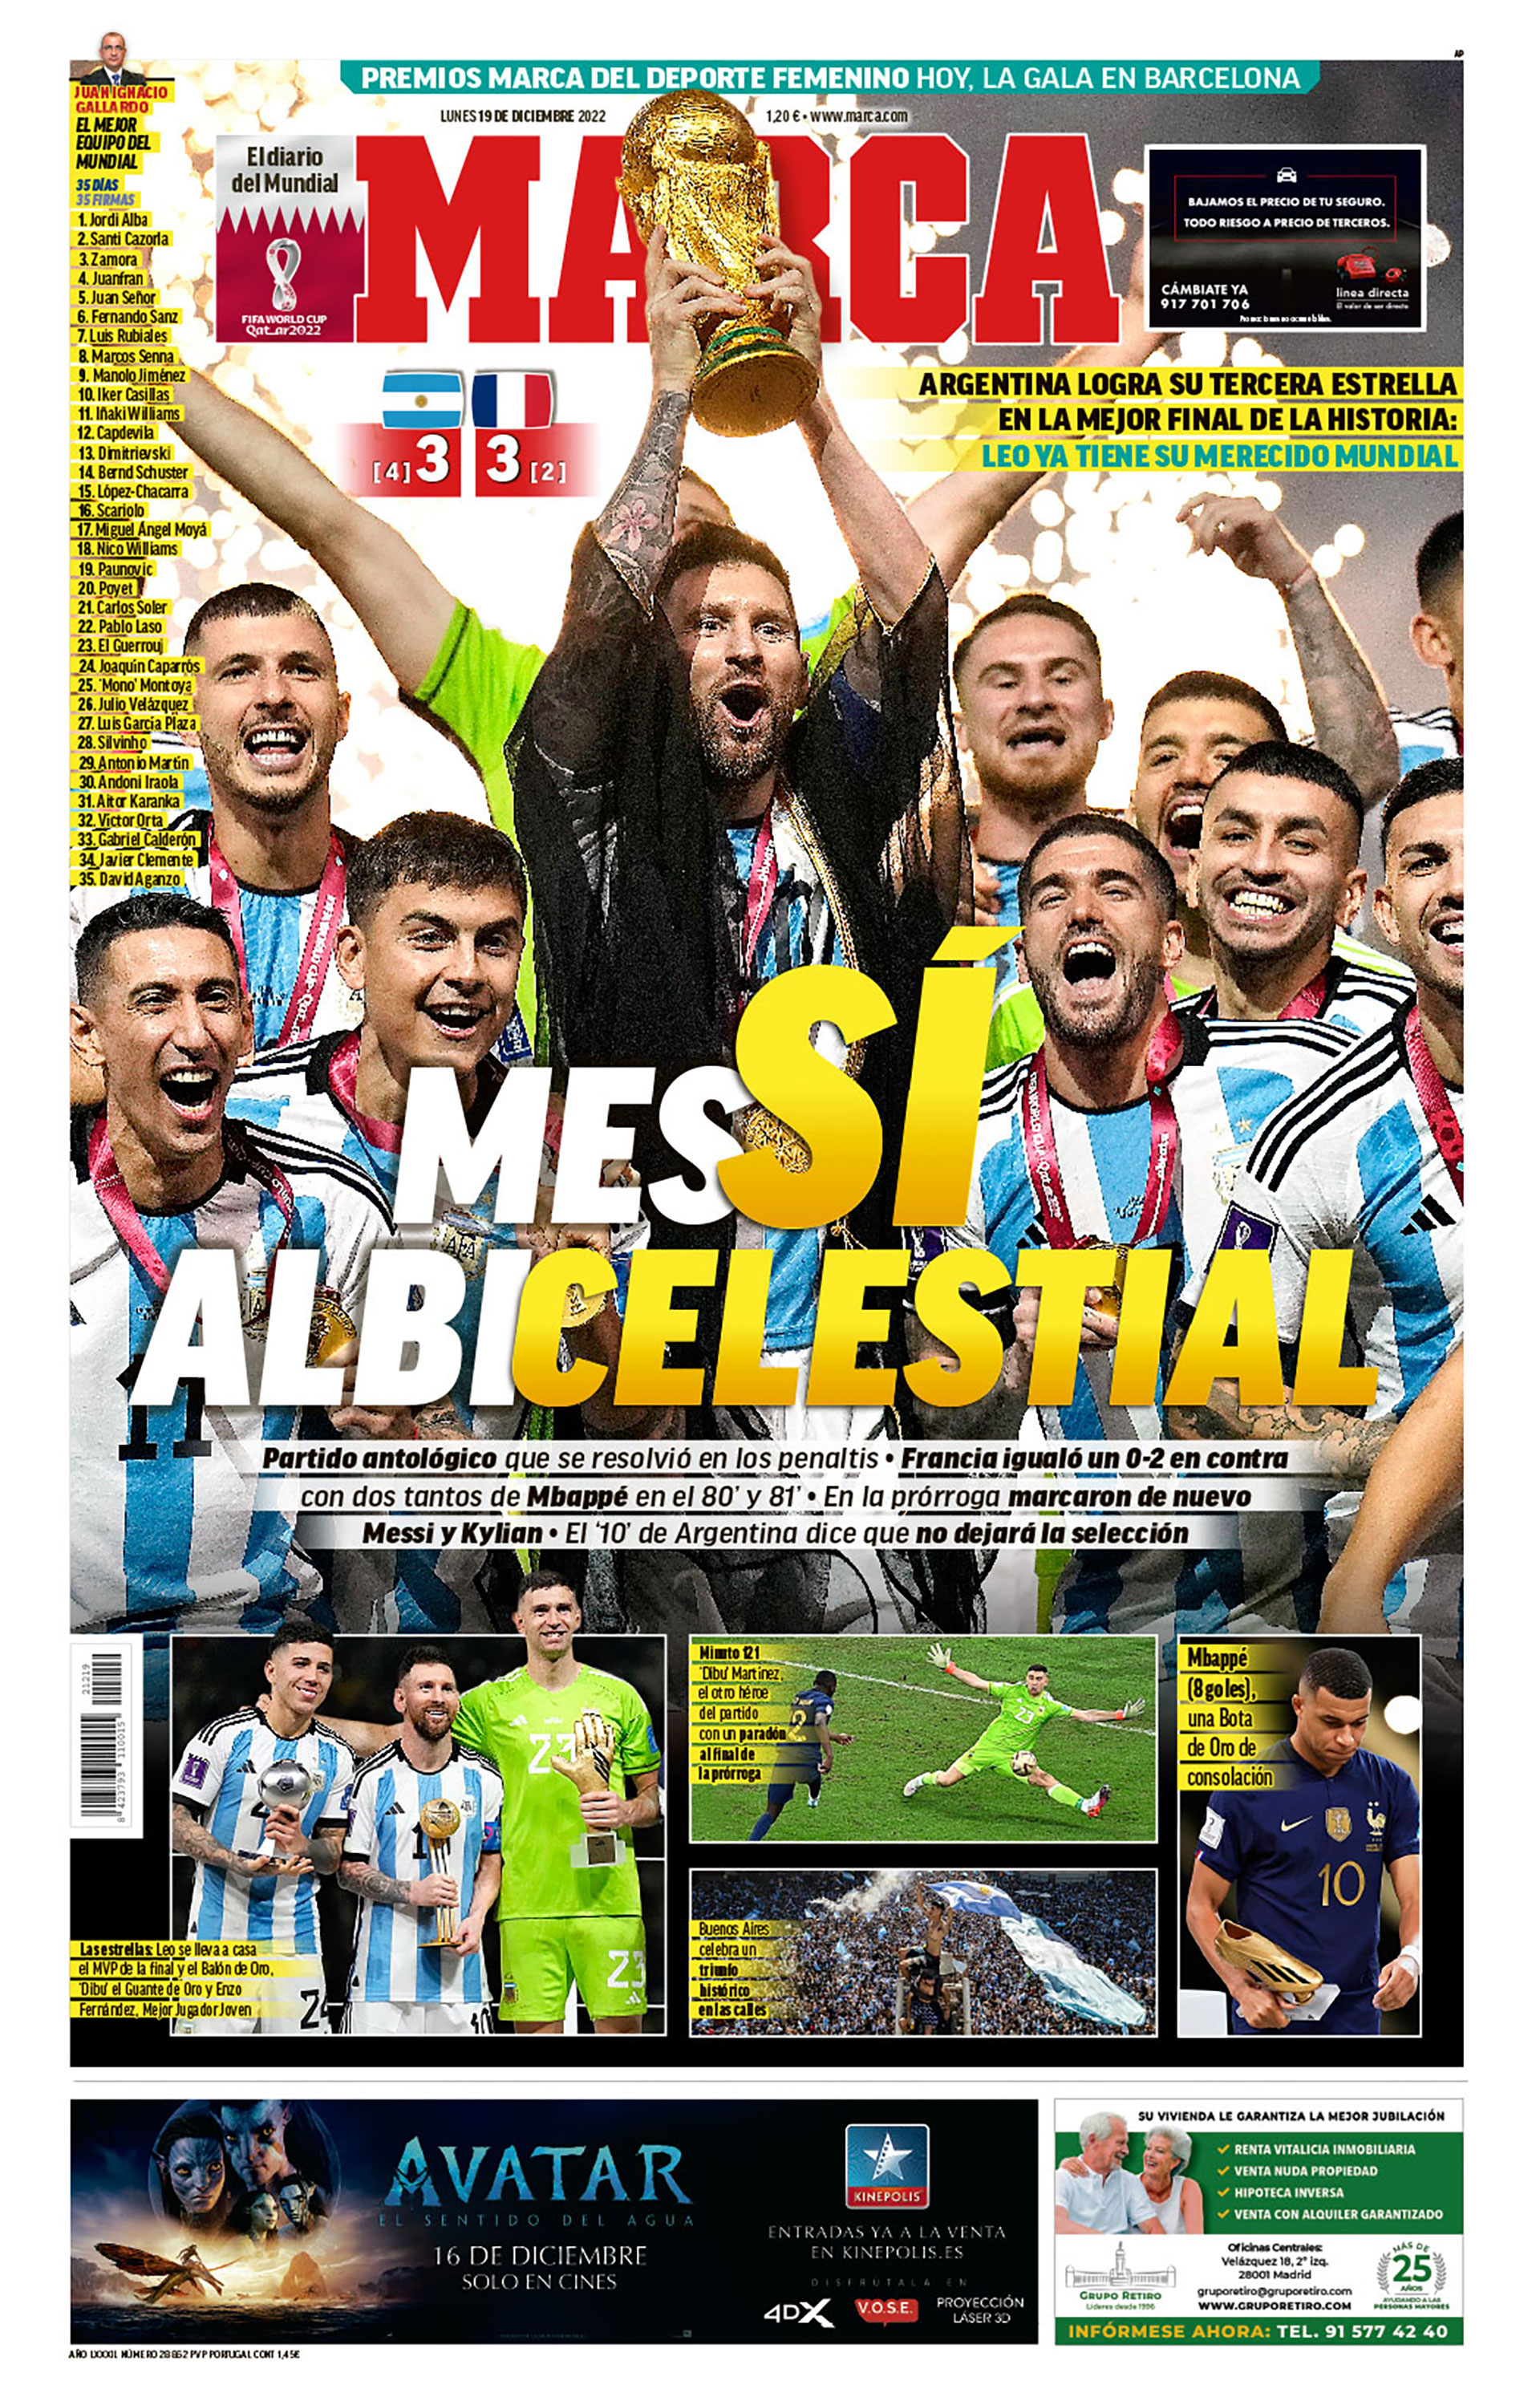 The images that Marca chose in the celebration of Argentina